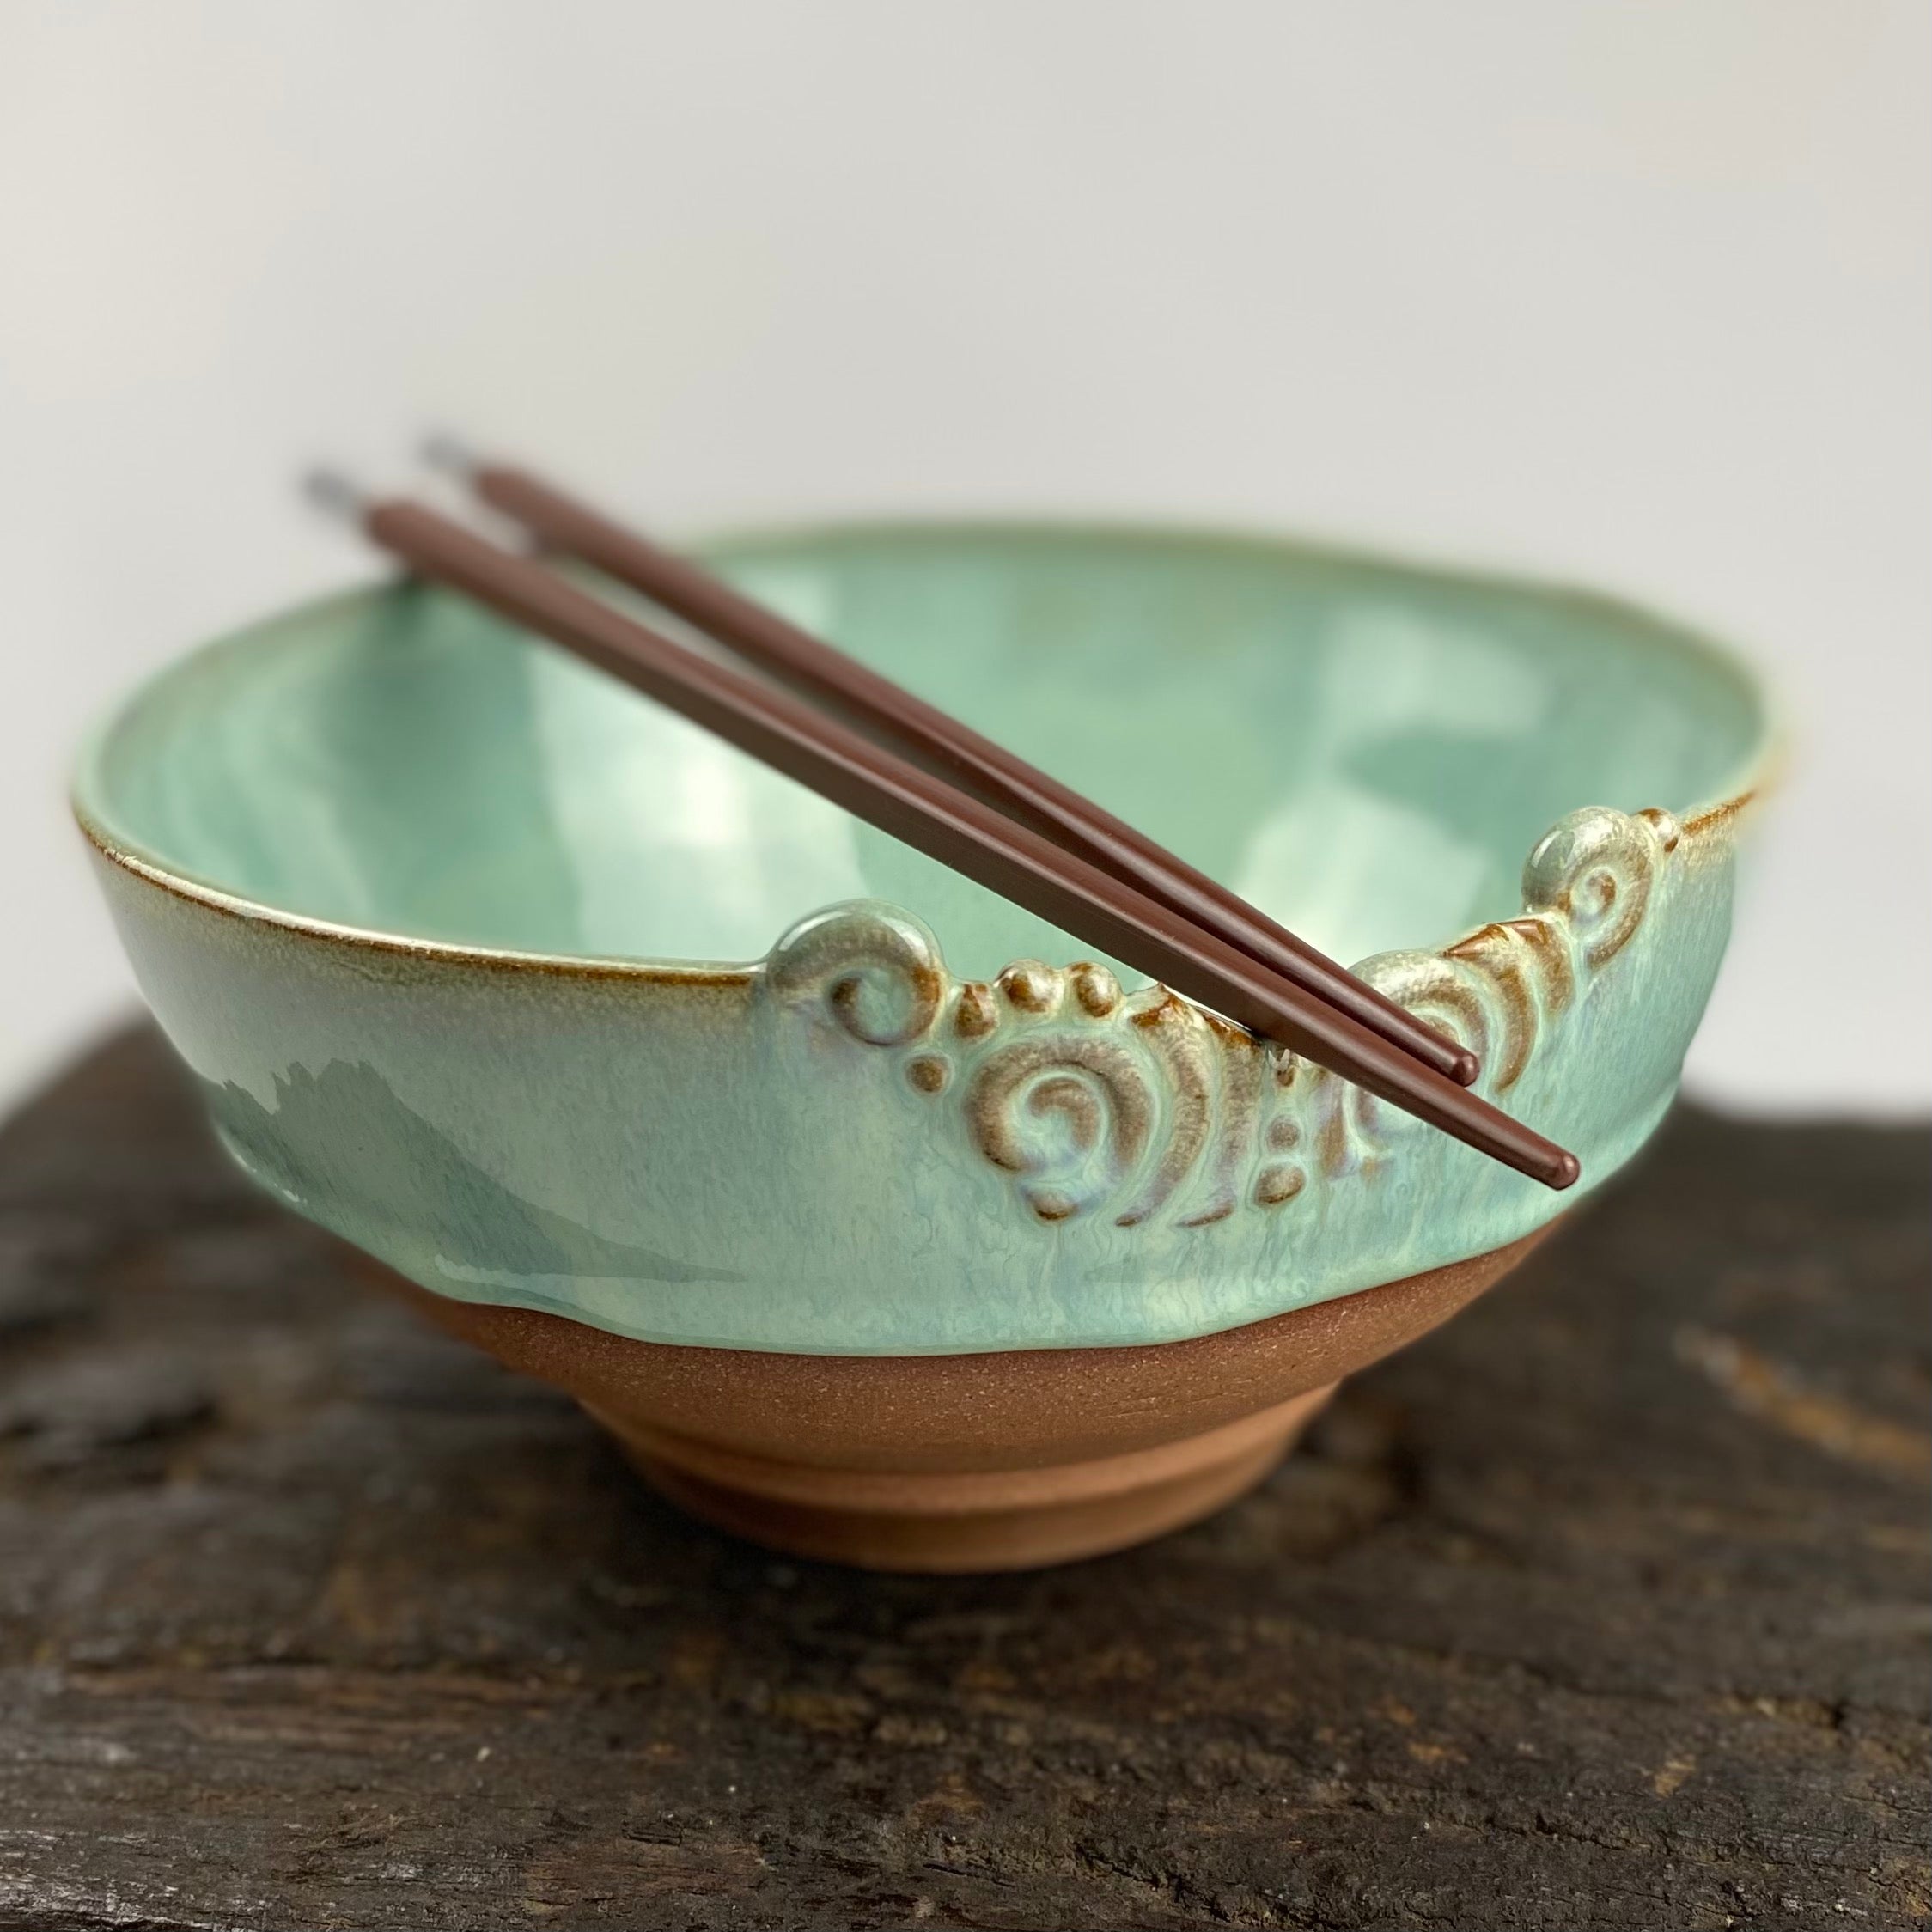 pottery wheel thrown noodle bowl with chopstick rest